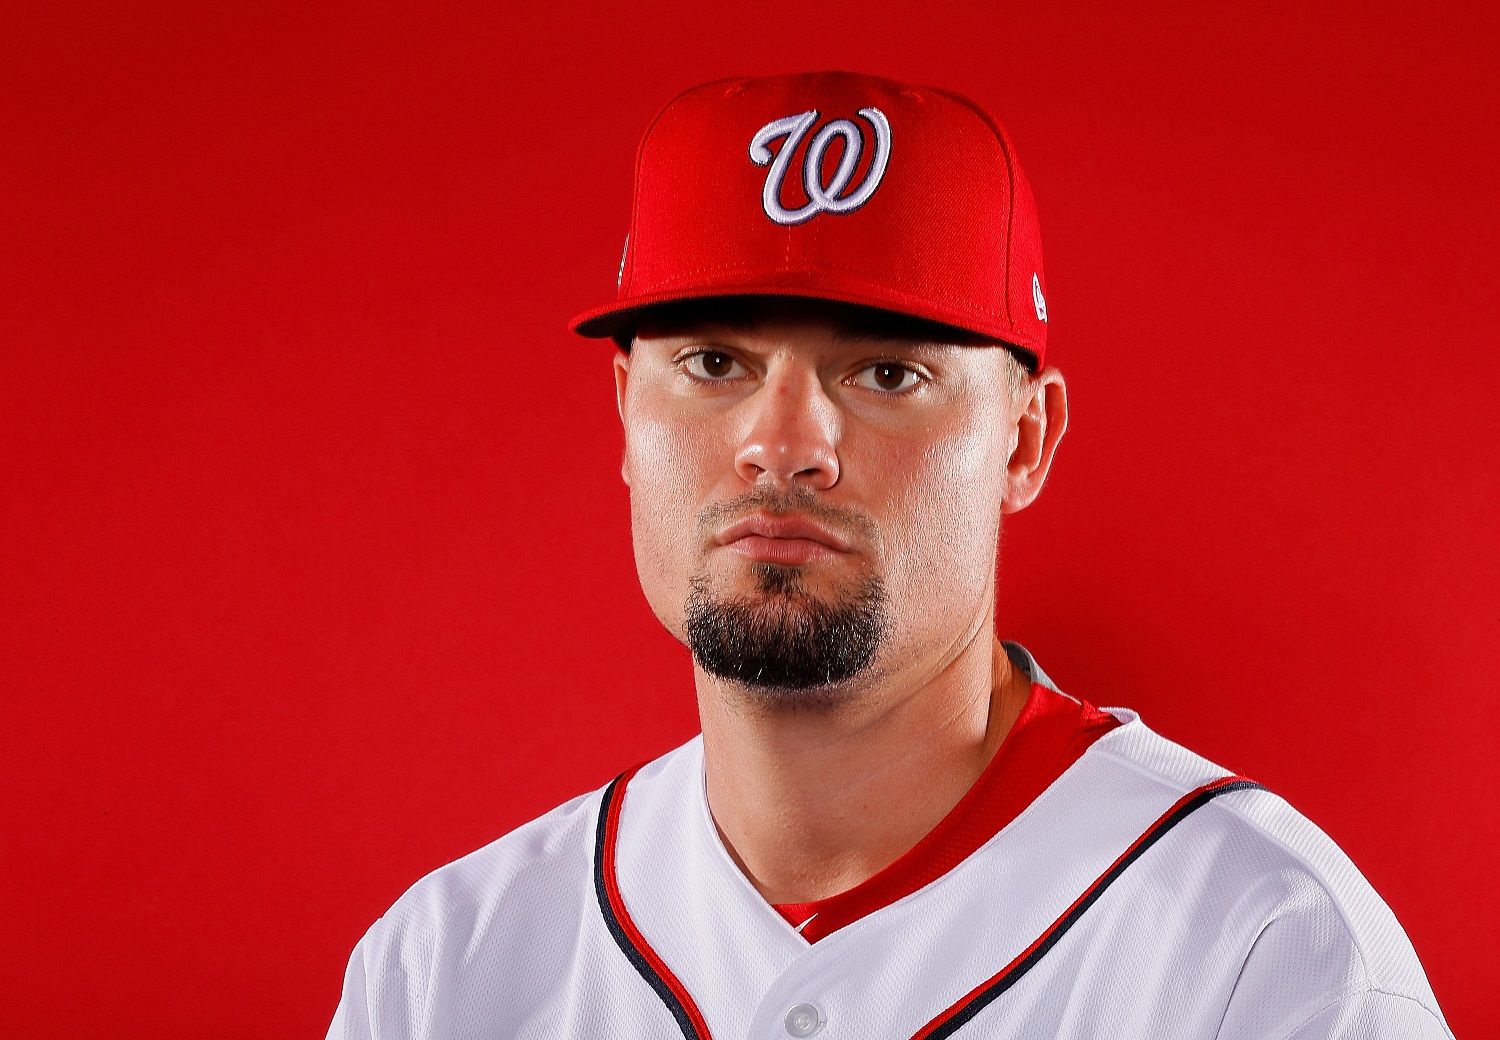 WEST PALM BEACH, FL - FEBRUARY 22:  Koda Glover #30 of the Washington Nationals poses for a photo during photo days at The Ballpark of the Palm Beaches on February 22, 2018 in West Palm Beach, Florida.  (Photo by Kevin C. Cox/Getty Images)